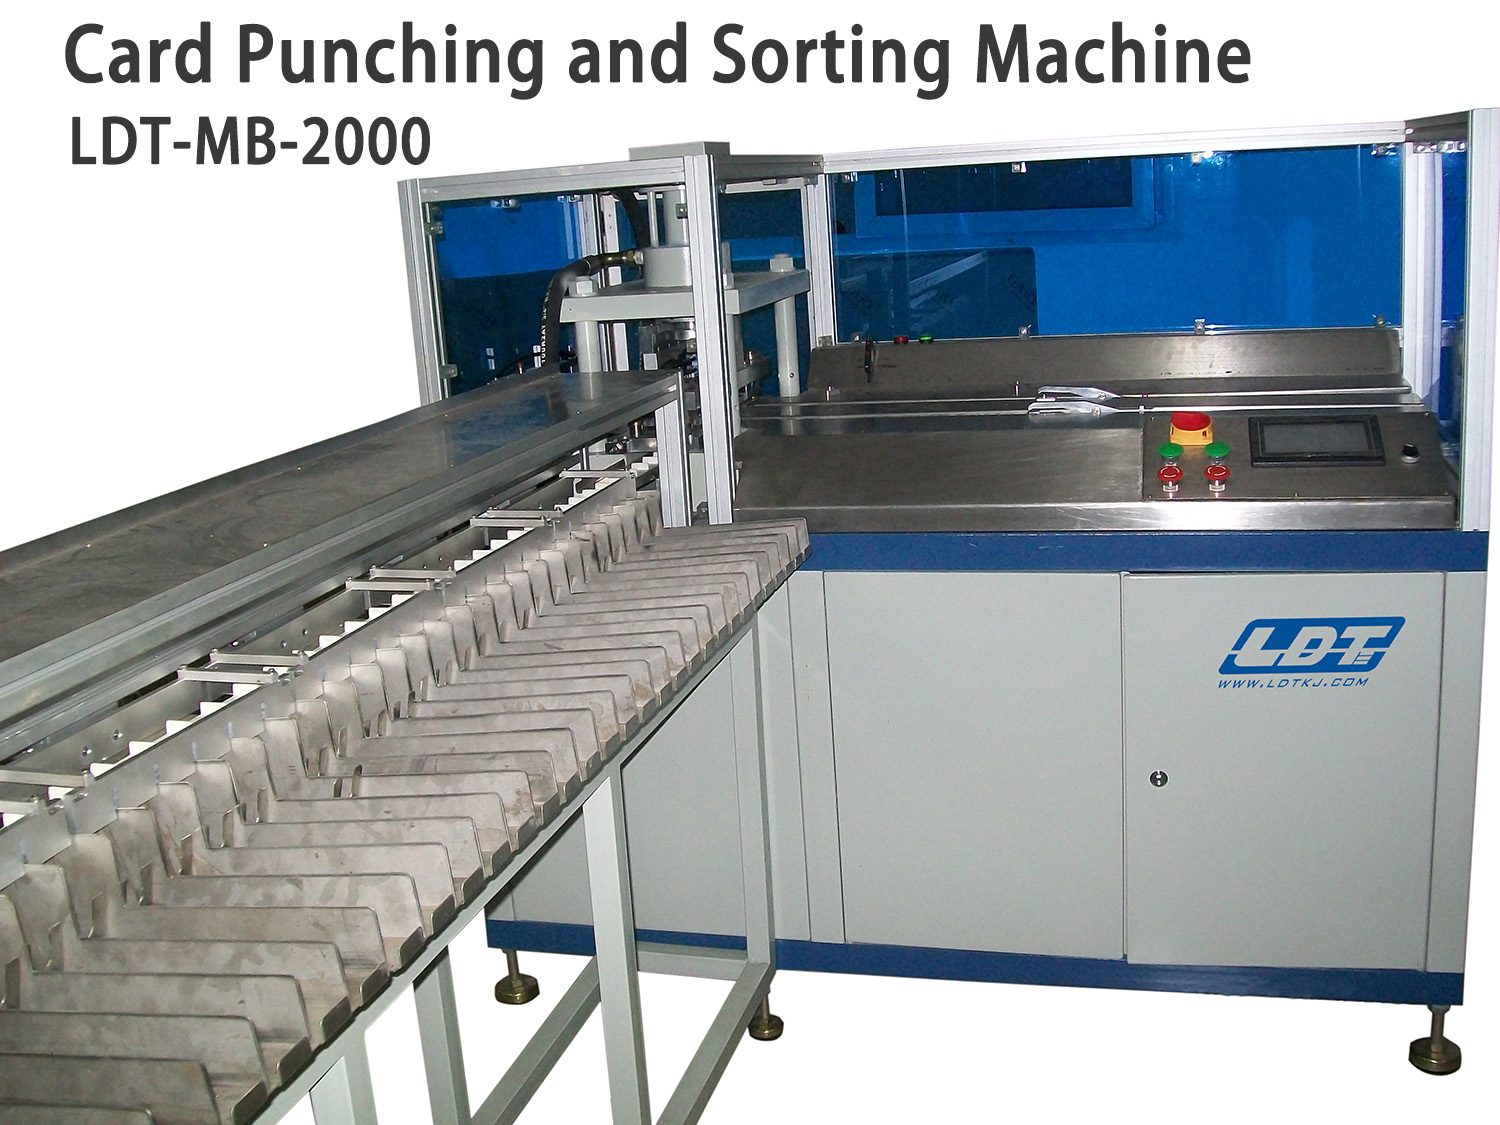 Card Punching and Sorting Machine LDT-MB-2000